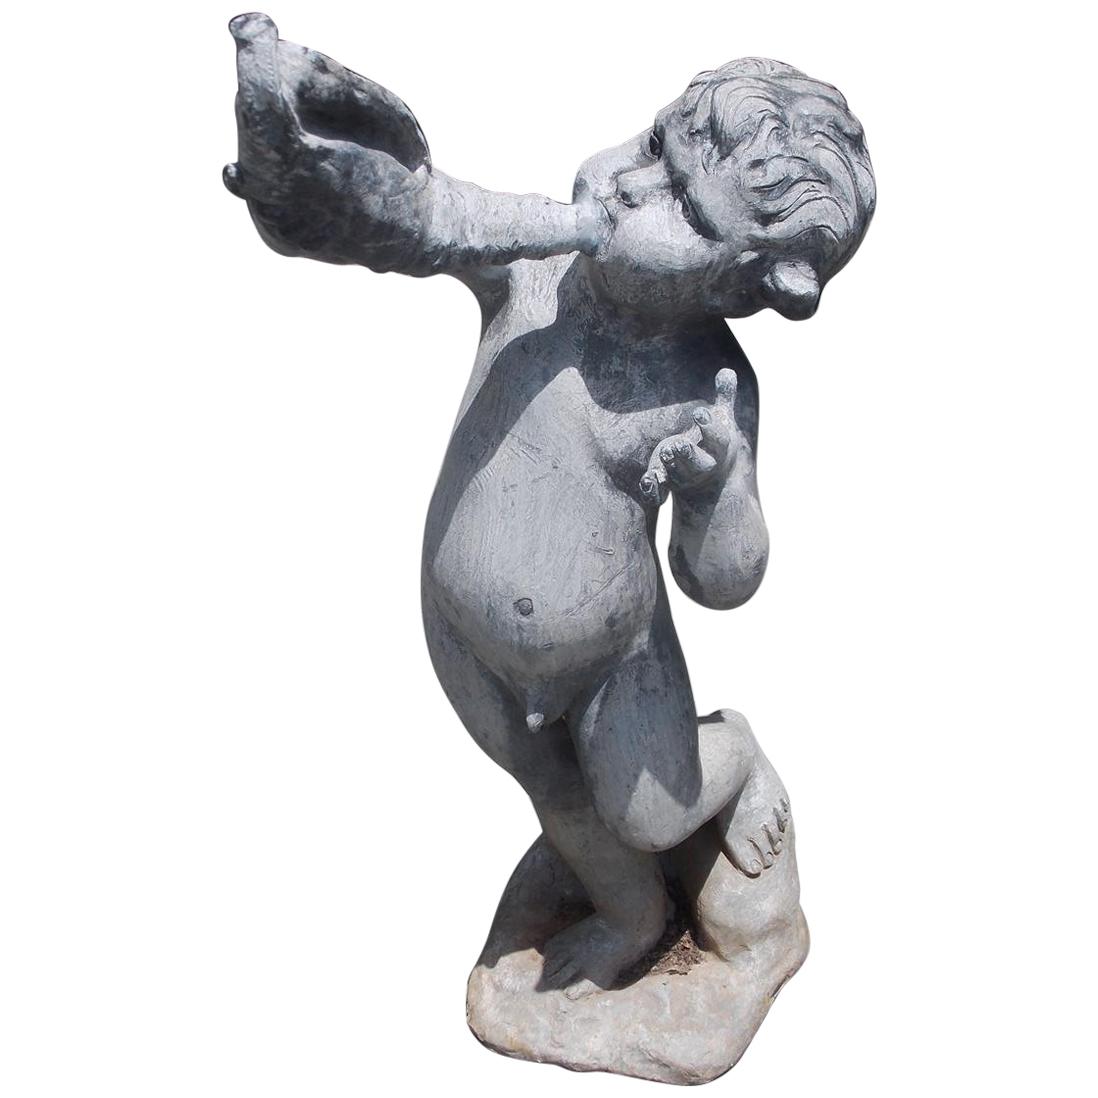 English Figural Lead Fountain with a Young Man Blowing on a Conch Shell, C. 1850